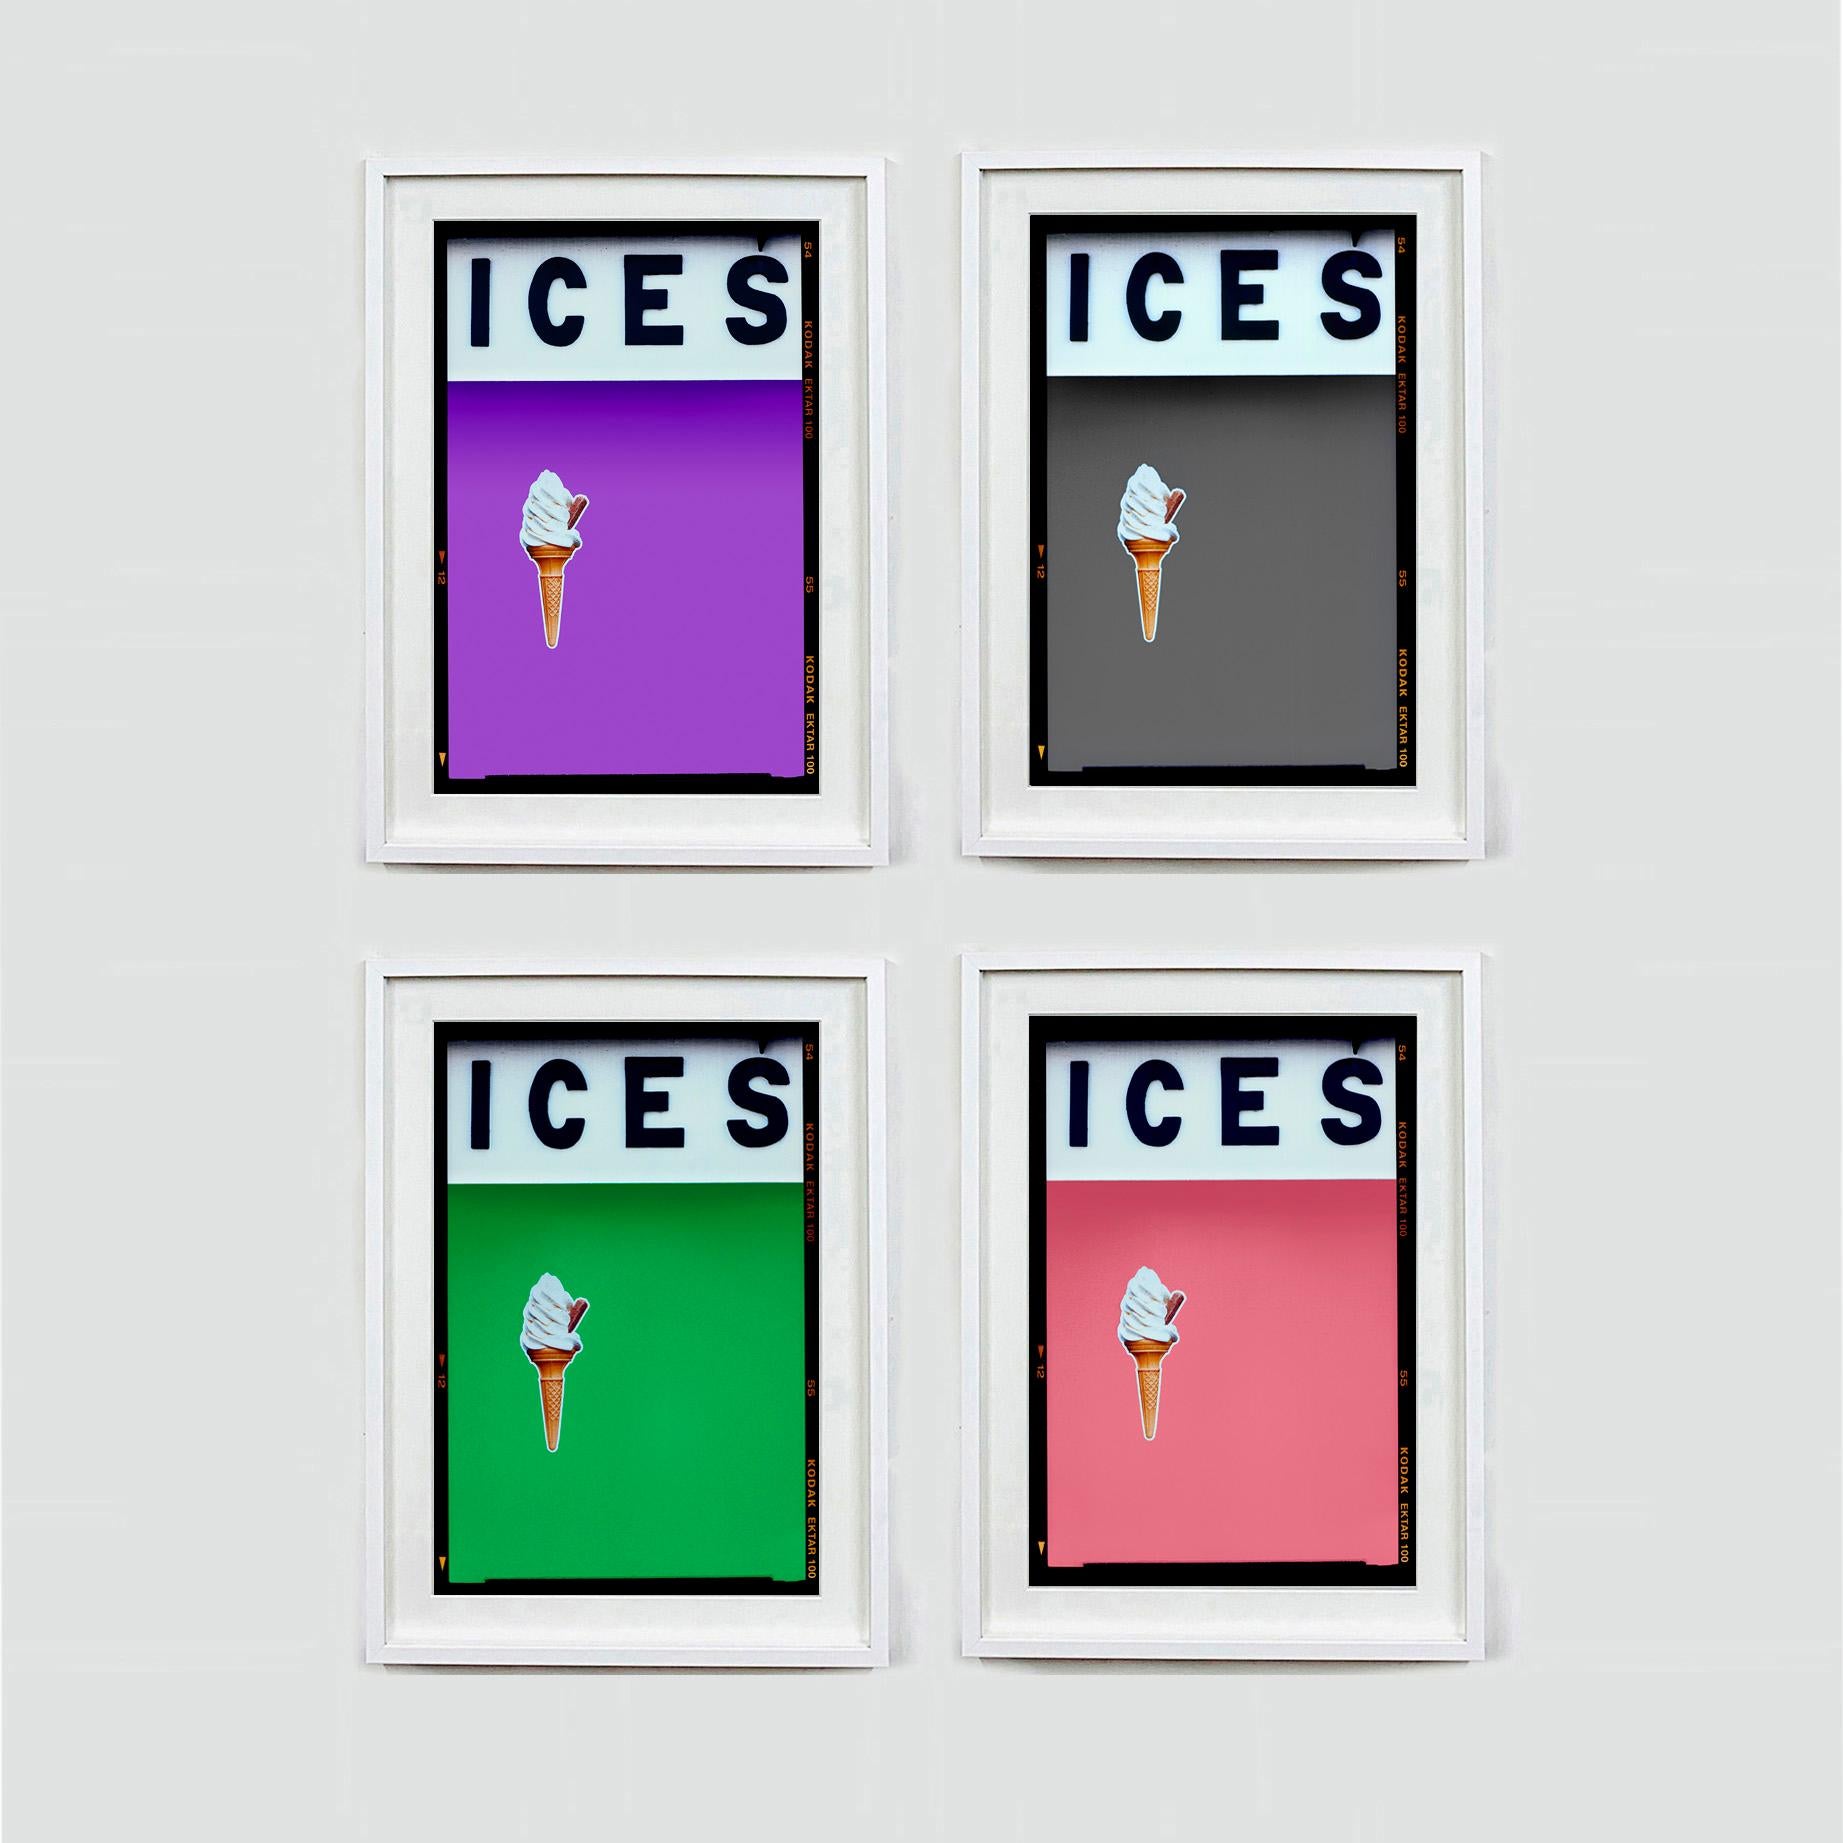 ICES, by Richard Heeps, photographed at the British Seaside at the end of summer 2020. This artwork is about evoking memories of the simple joy of days by the beach. The monochrome grey color blocking, typography and the surreal twist of the